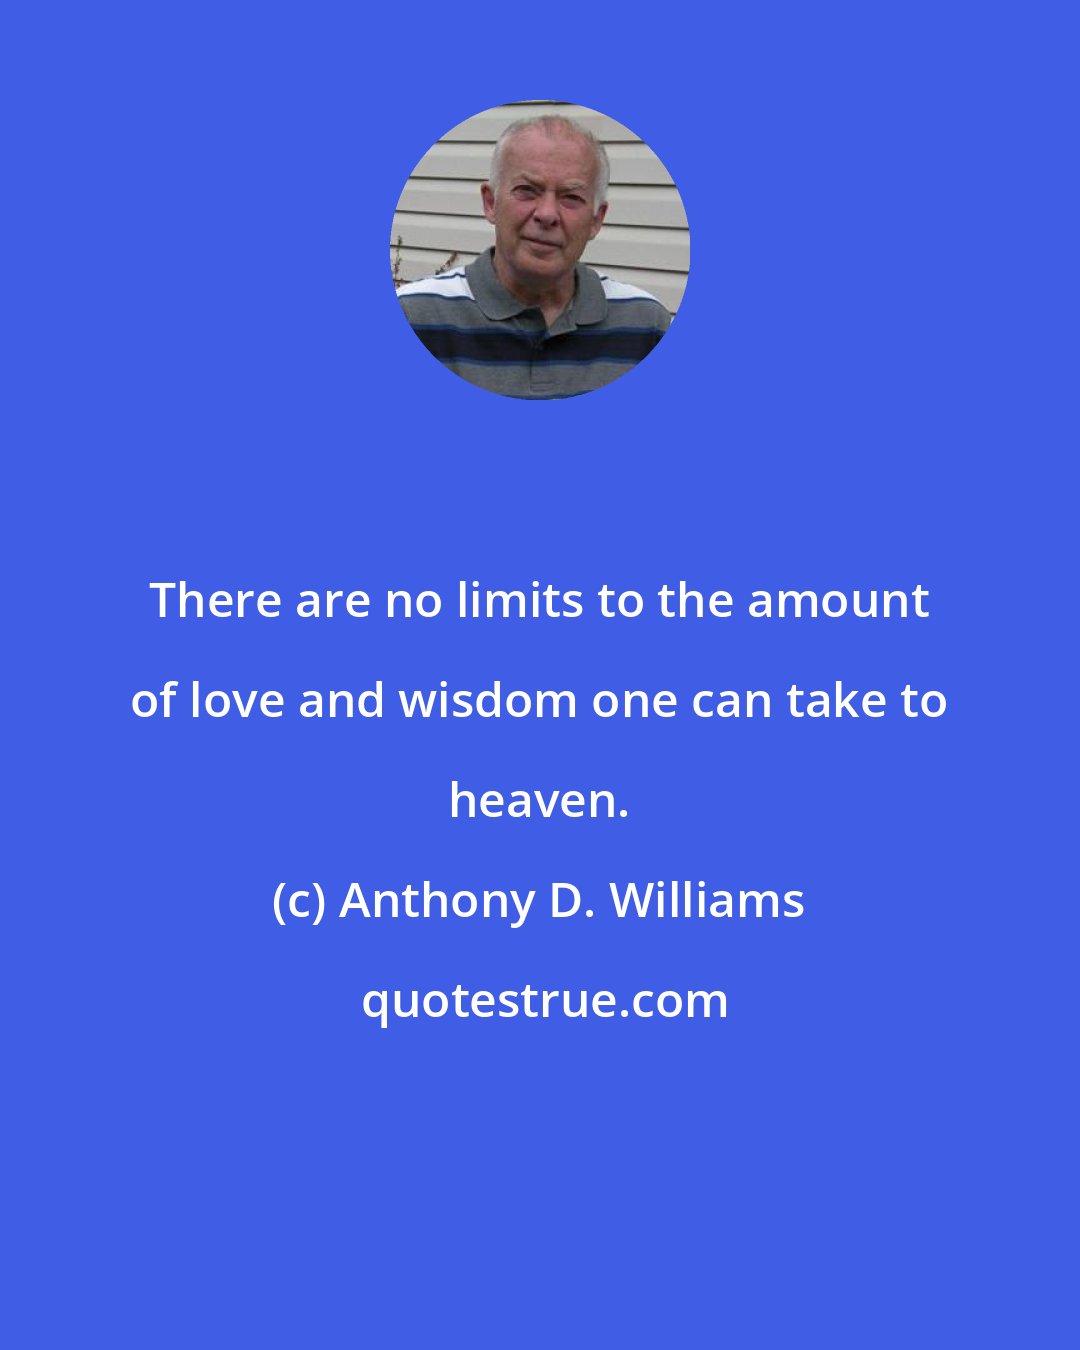 Anthony D. Williams: There are no limits to the amount of love and wisdom one can take to heaven.